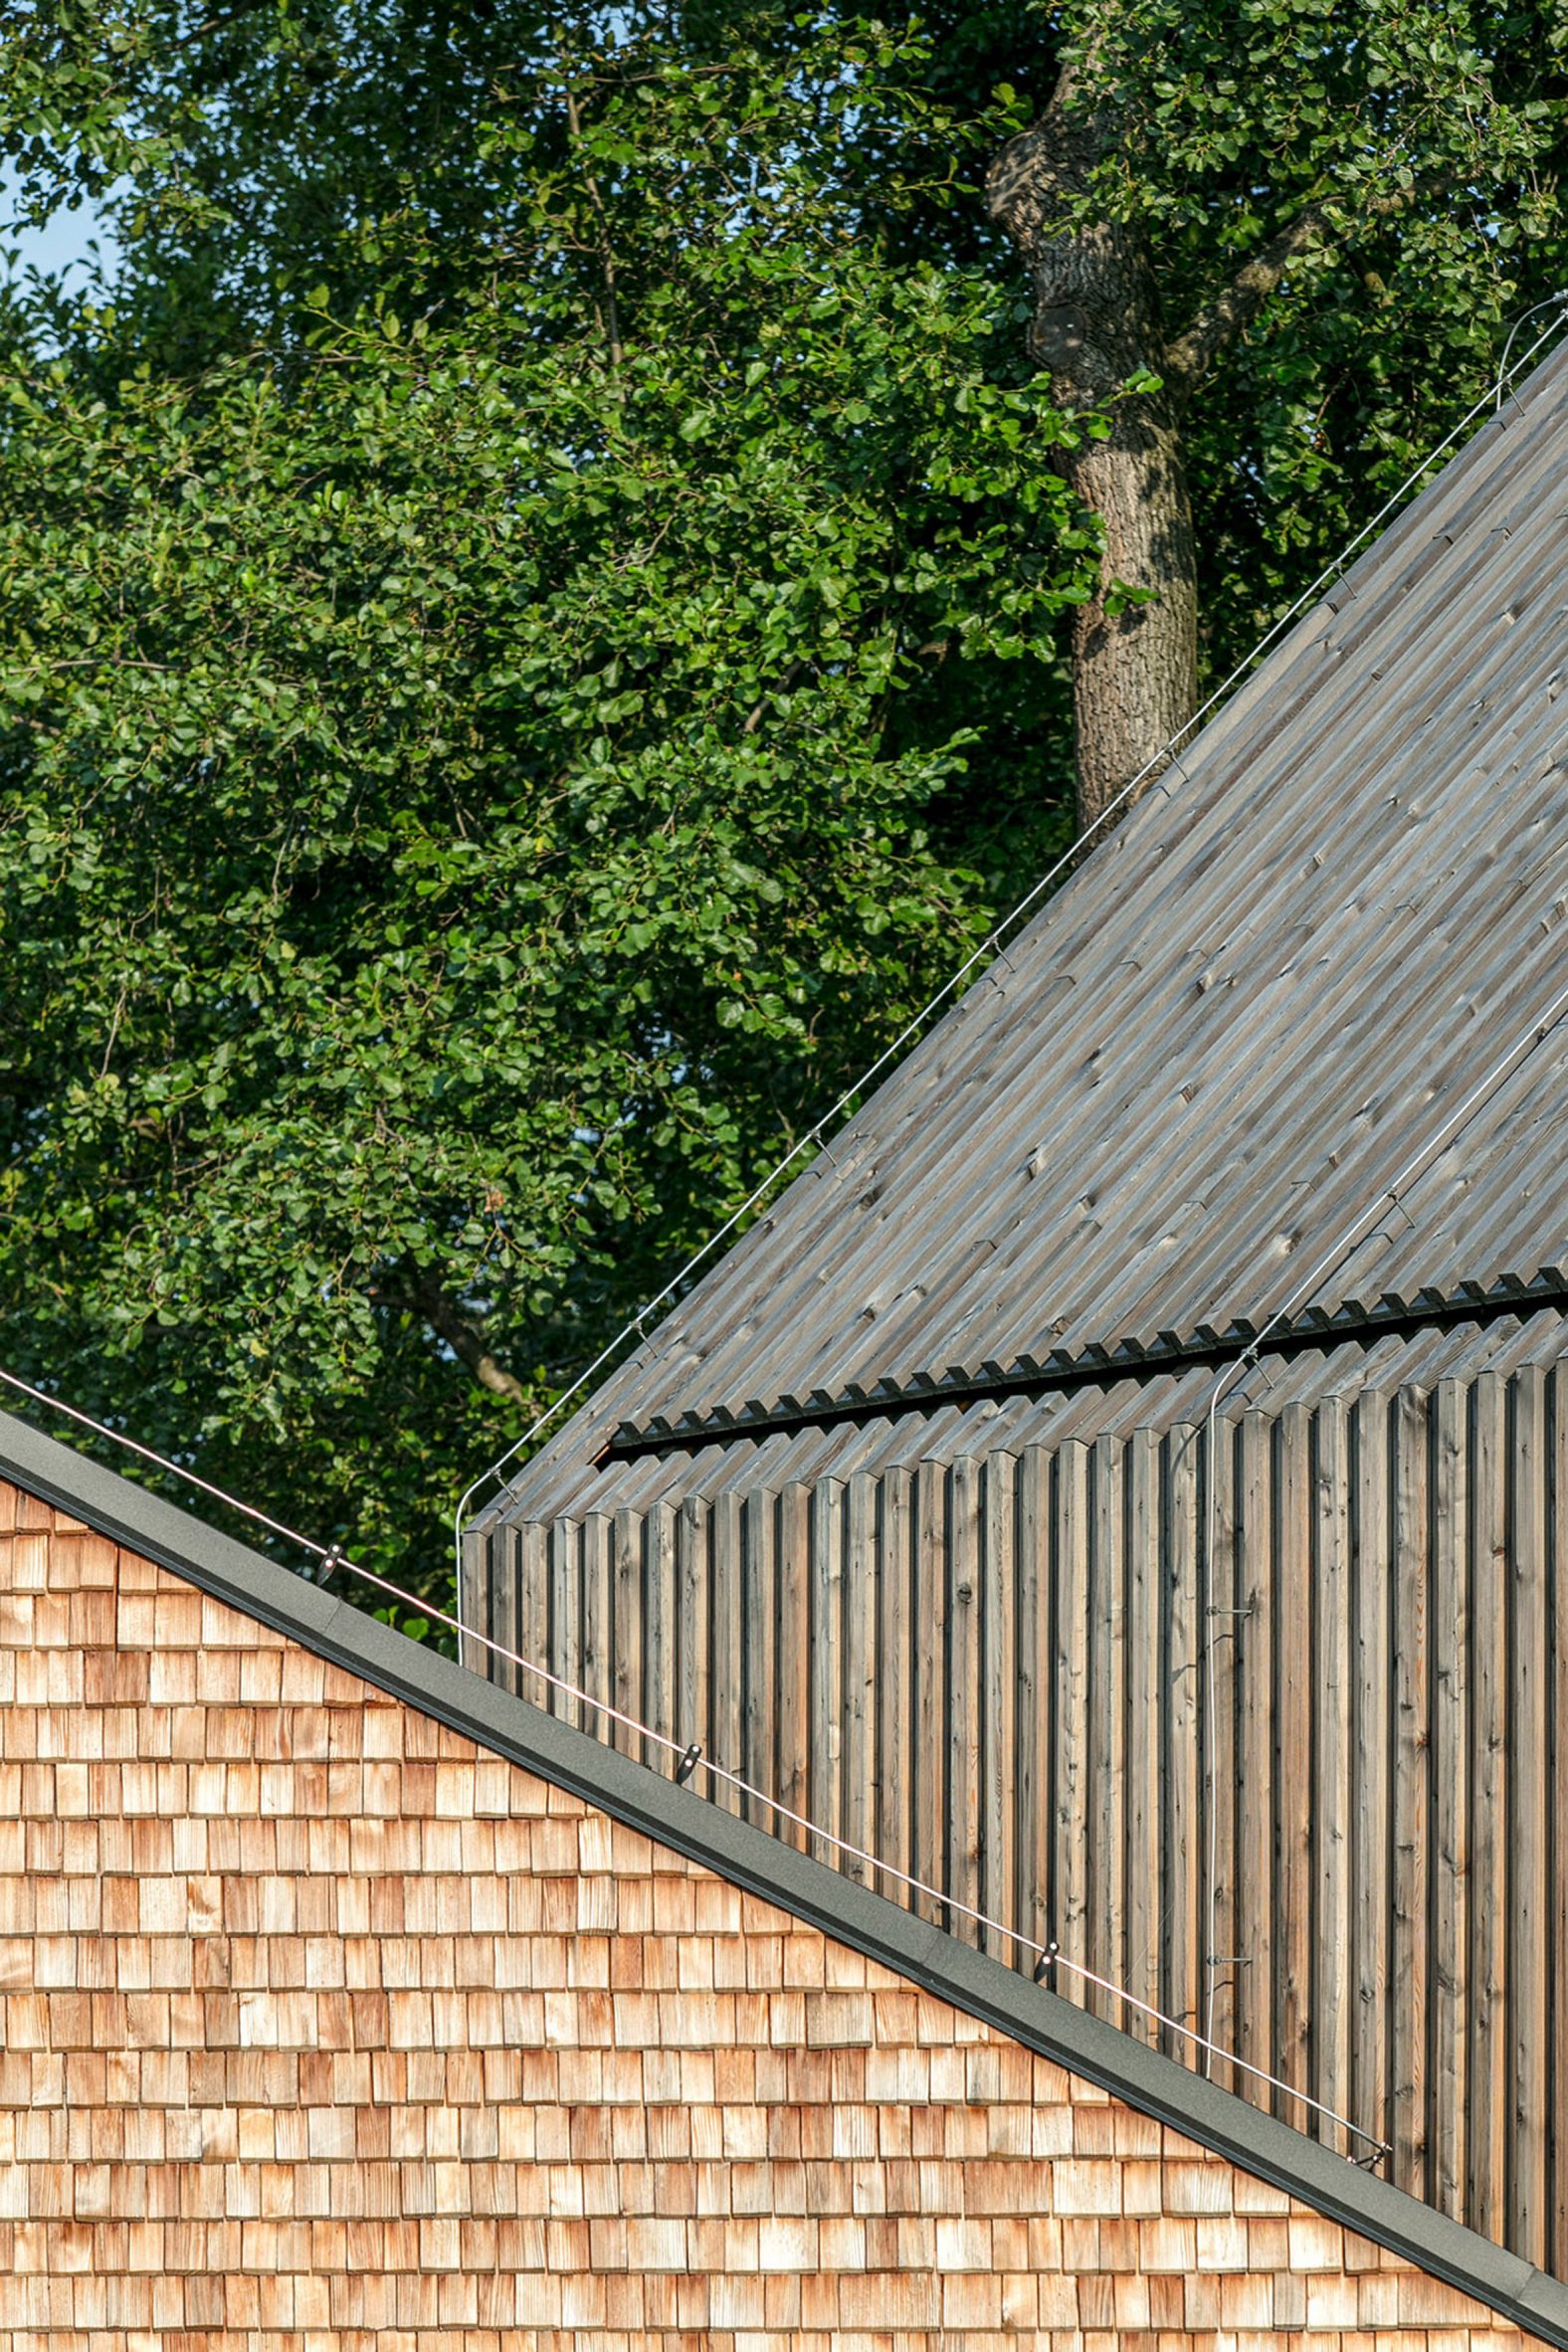 Intersecting roofs on a wooden building, one part clad in square shingle-like elements and one with planks